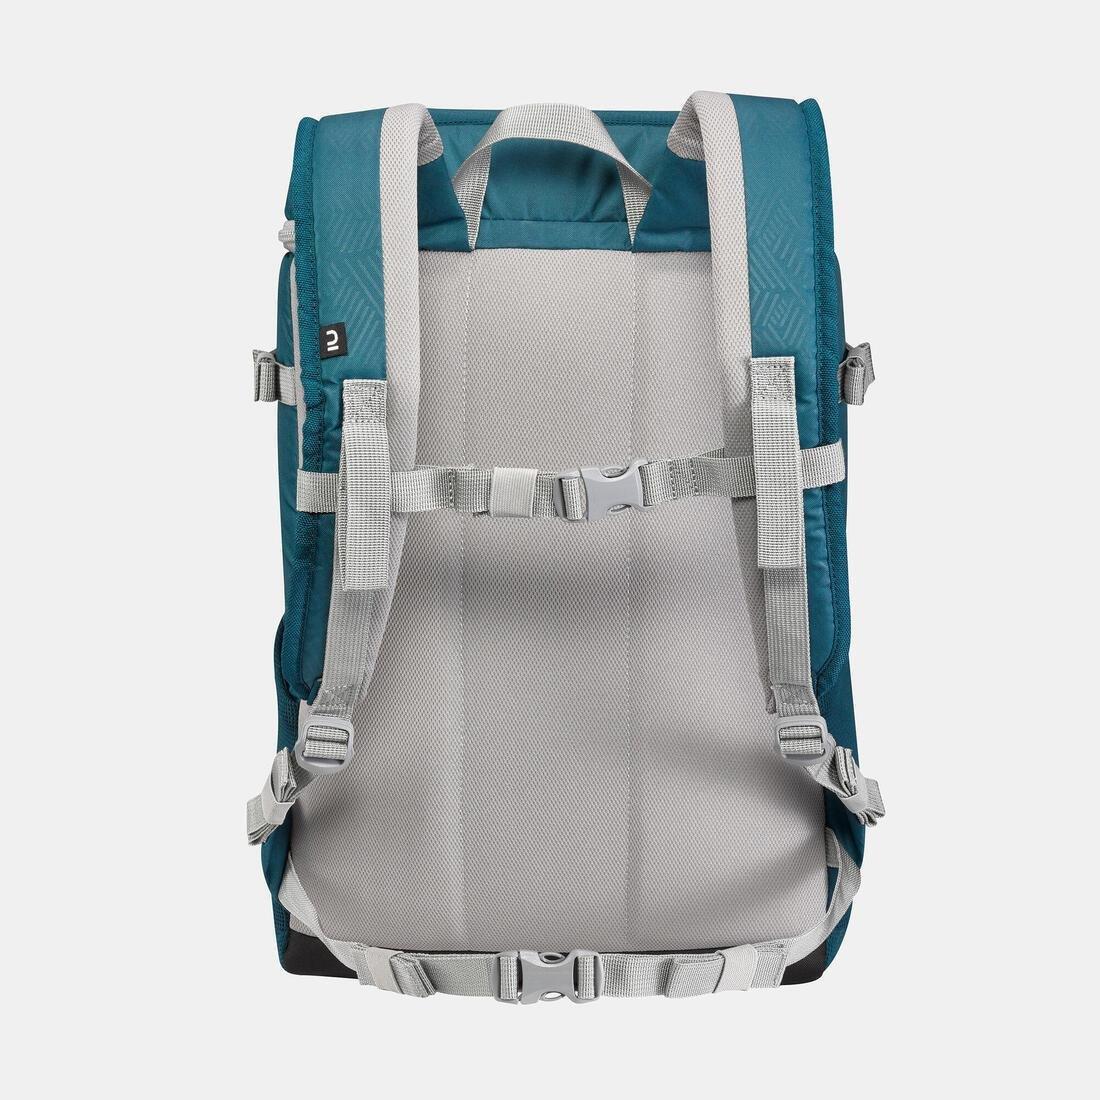 QUECHUA - Isothermal Backpack 20 L - Nh100 Ice Compact, Blue